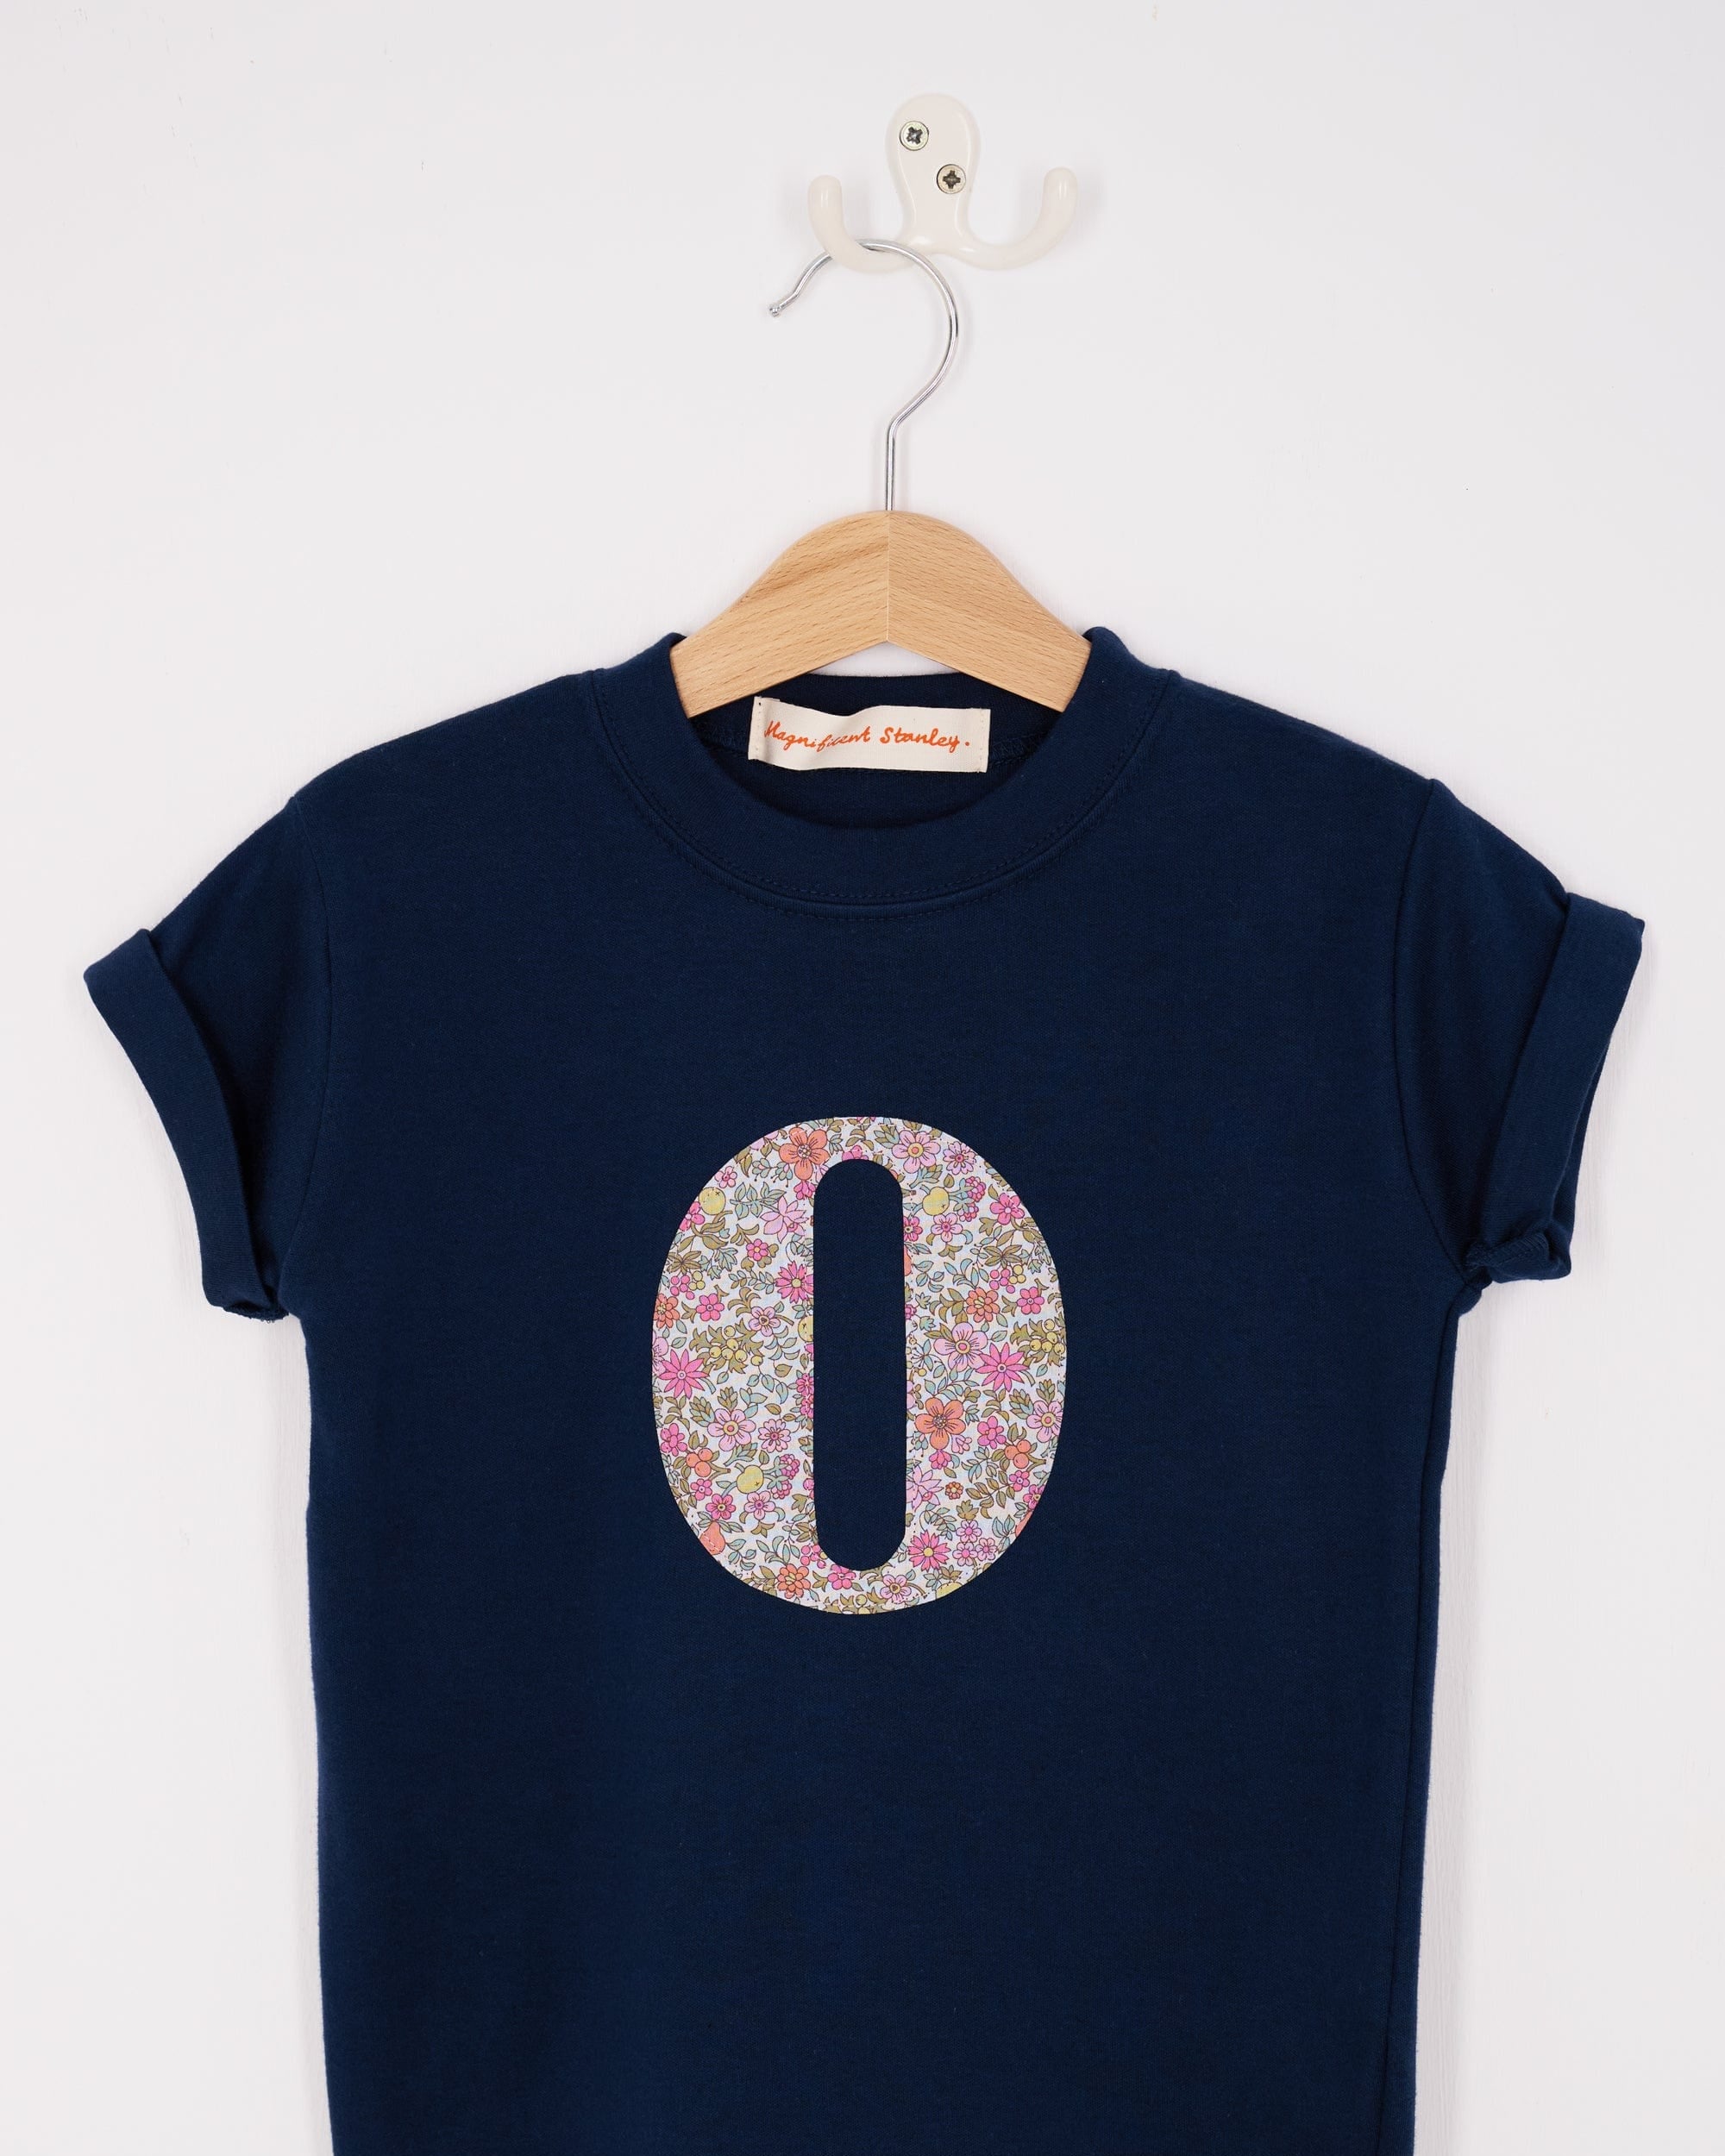 Magnificent Stanley Tee Personalised Navy T-Shirt in Fruit Punch Liberty Print